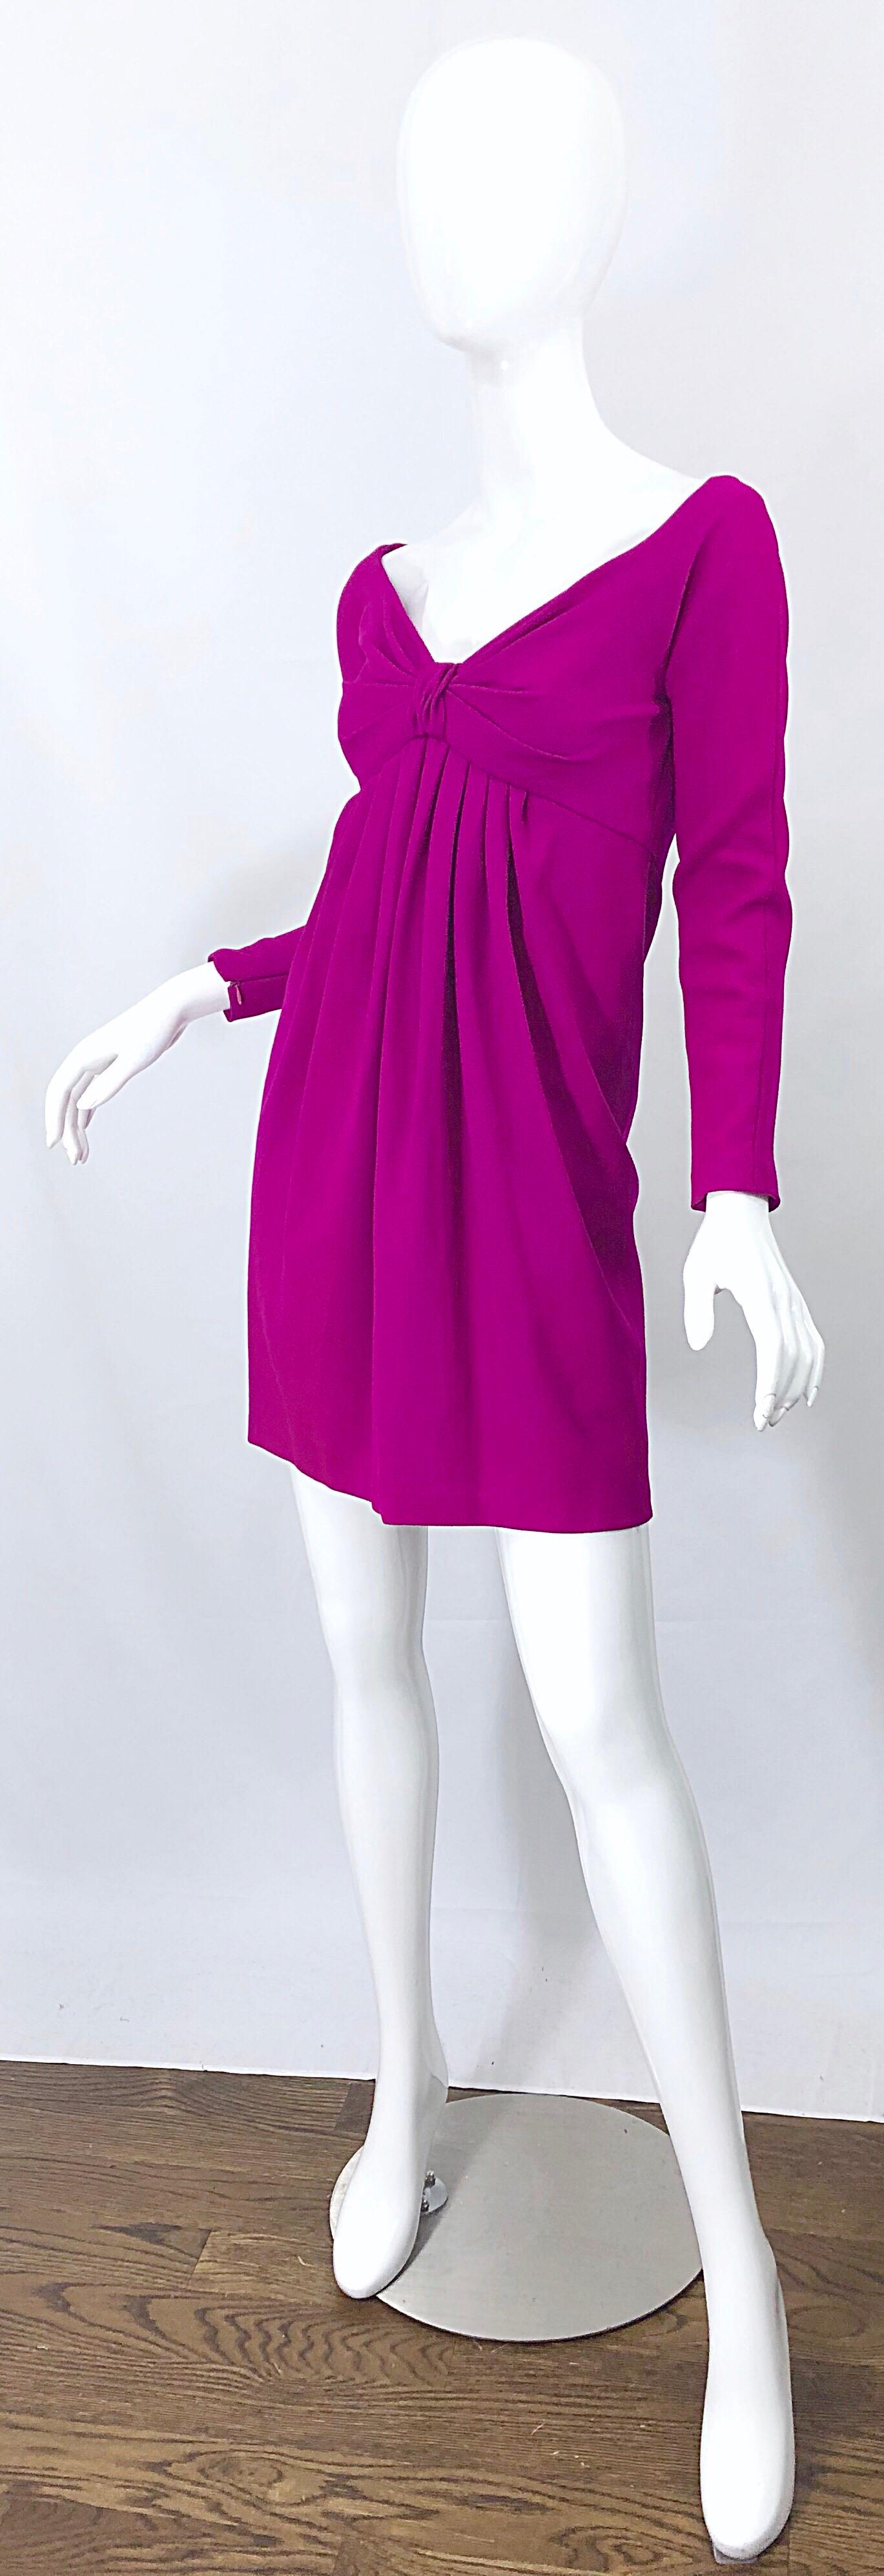 Carolyne Roehm 1990s Fuchsia Hot Pink Wool Vintage 90s Mini Empire Dress In Excellent Condition For Sale In San Diego, CA